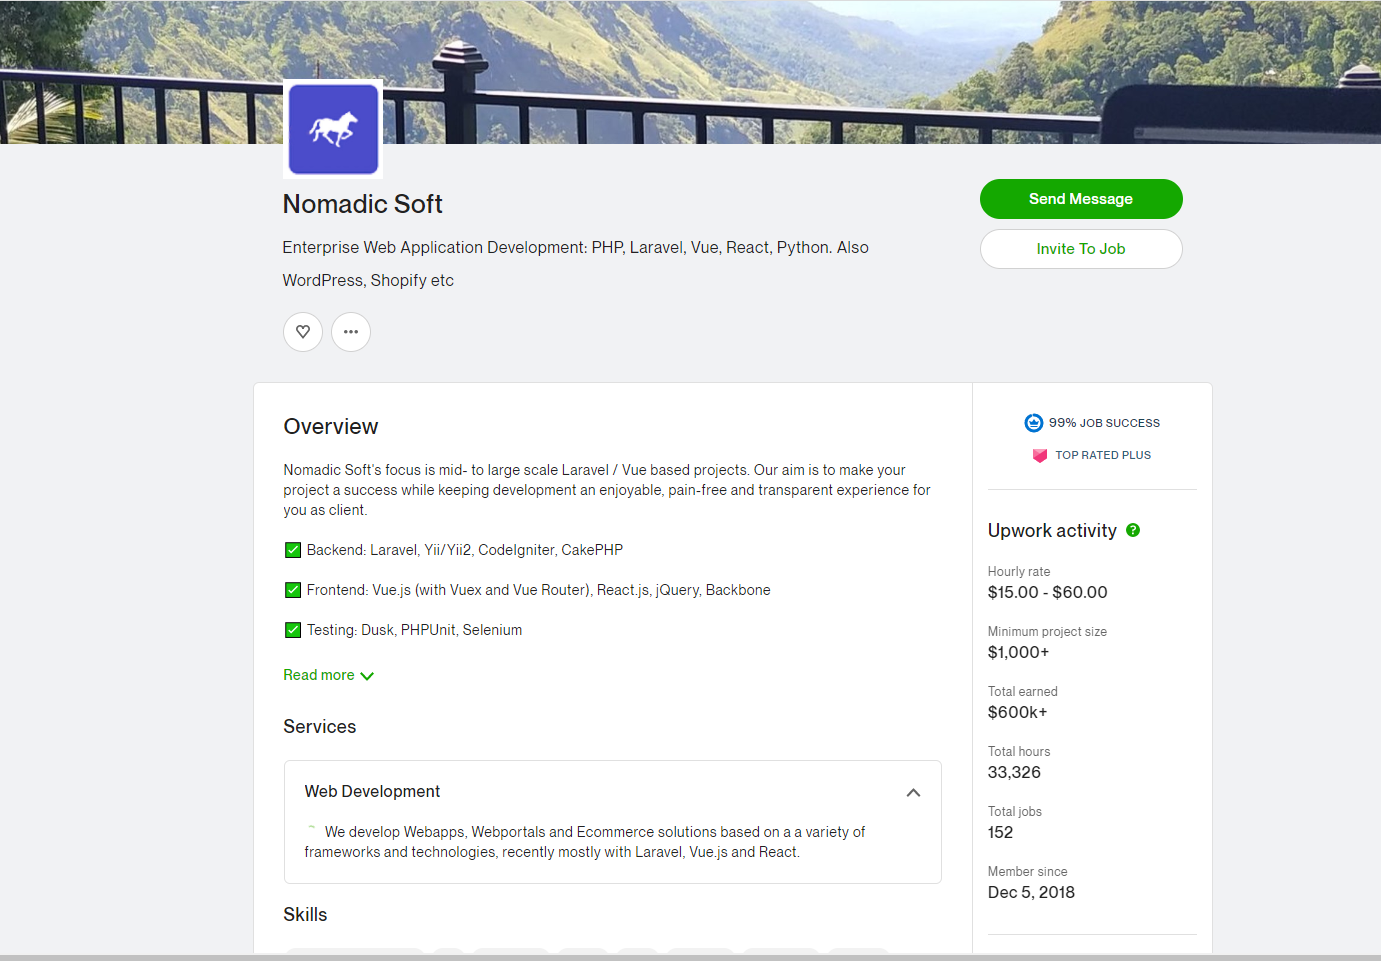 Our page on Upwork, you can hire us there https://www.upwork.com/ag/nomadicsoft/ hire front end developers there